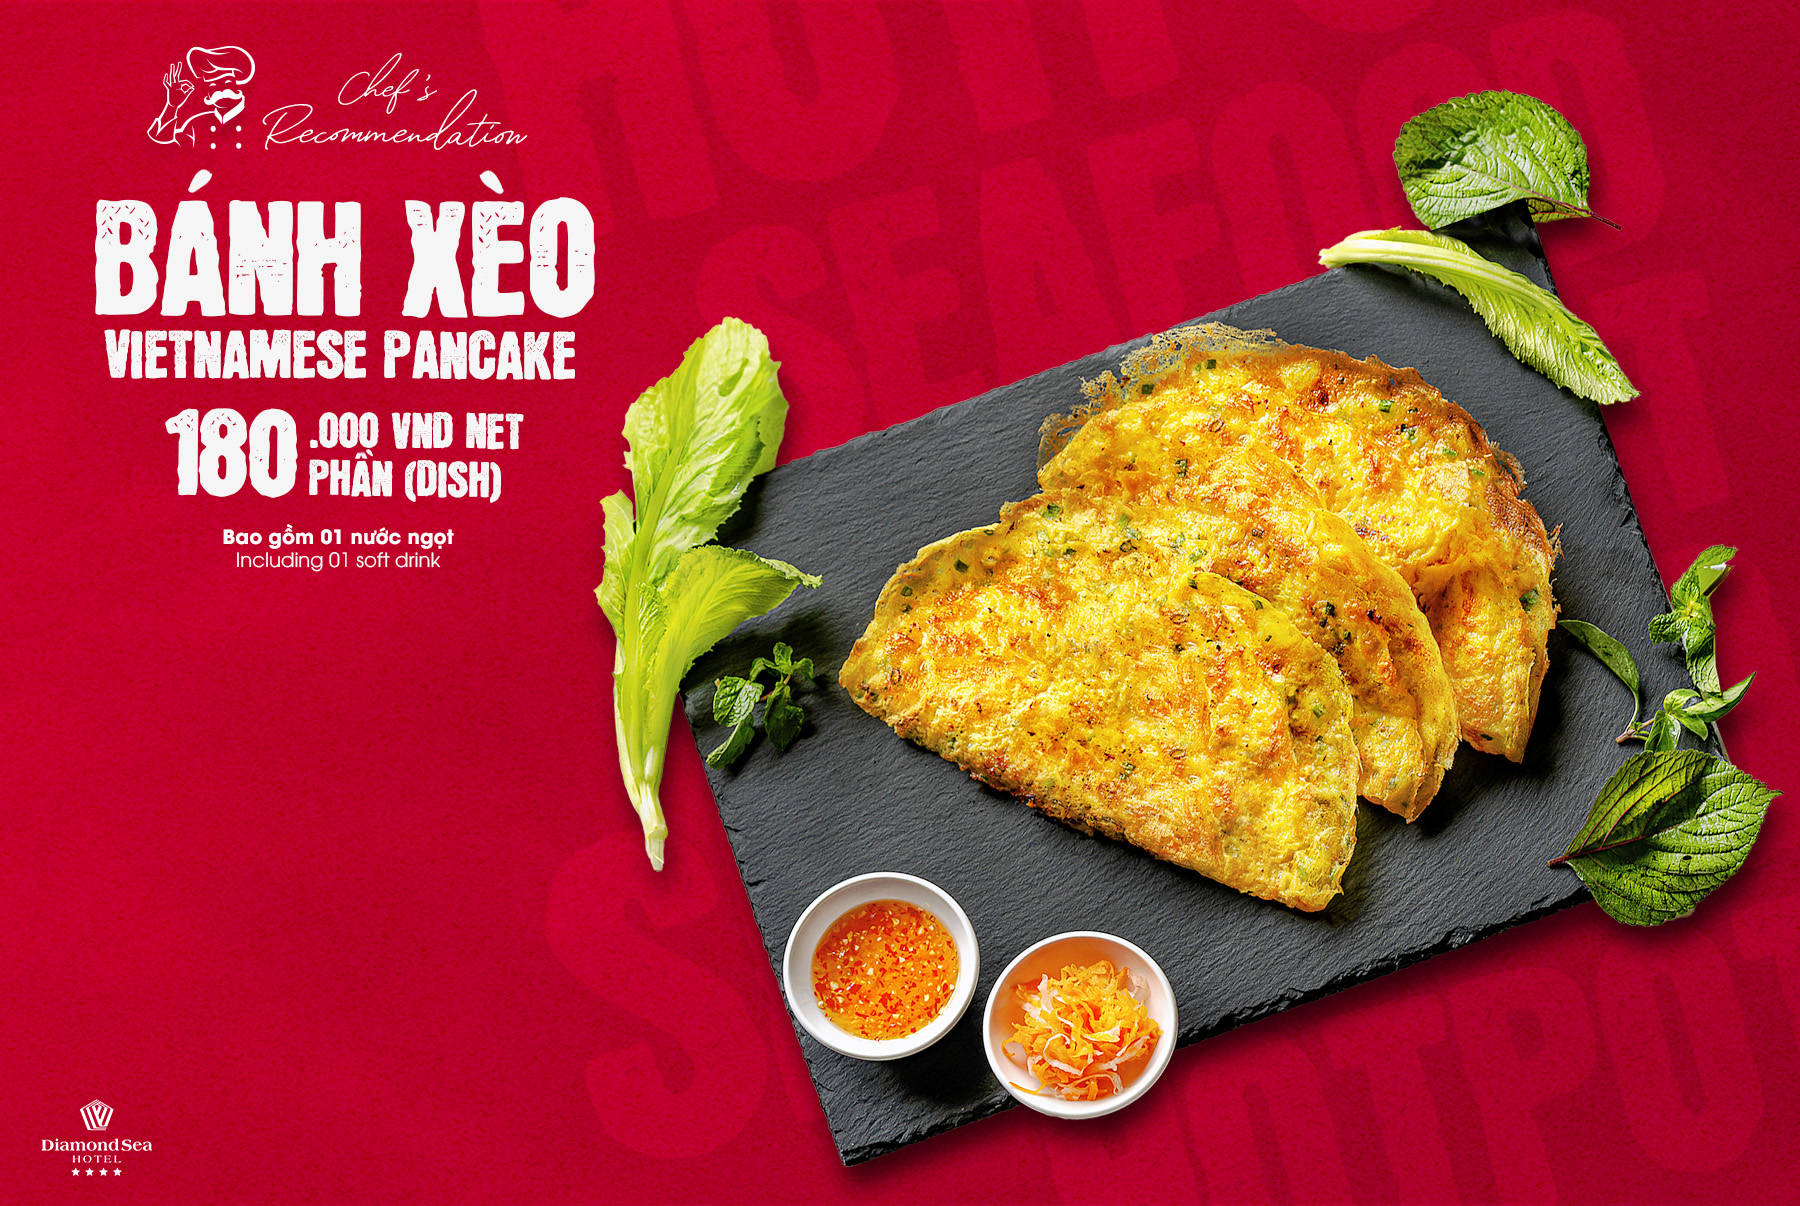 Chef’s Recommendation: Banh Xeo - Vietnamese Pancake